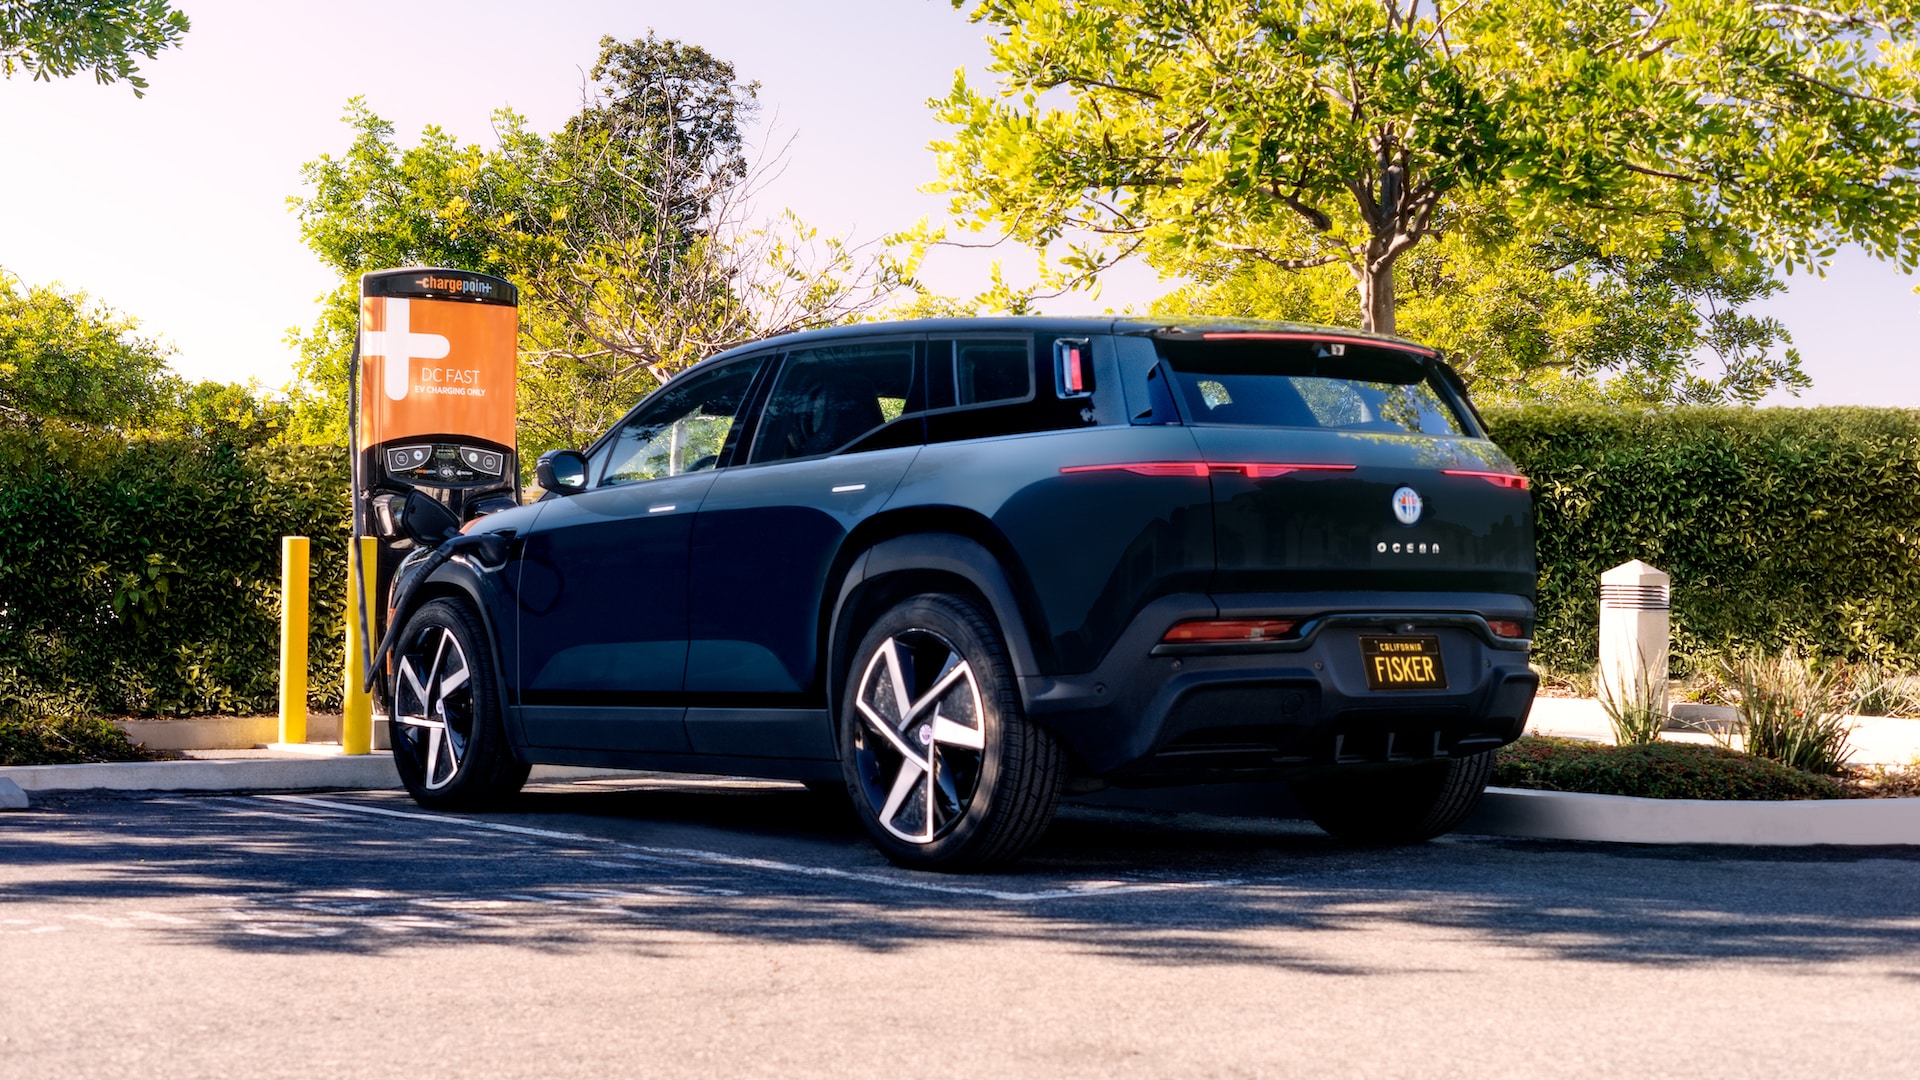 ChargePoint and Fisker strike deal to improve EV driver experience